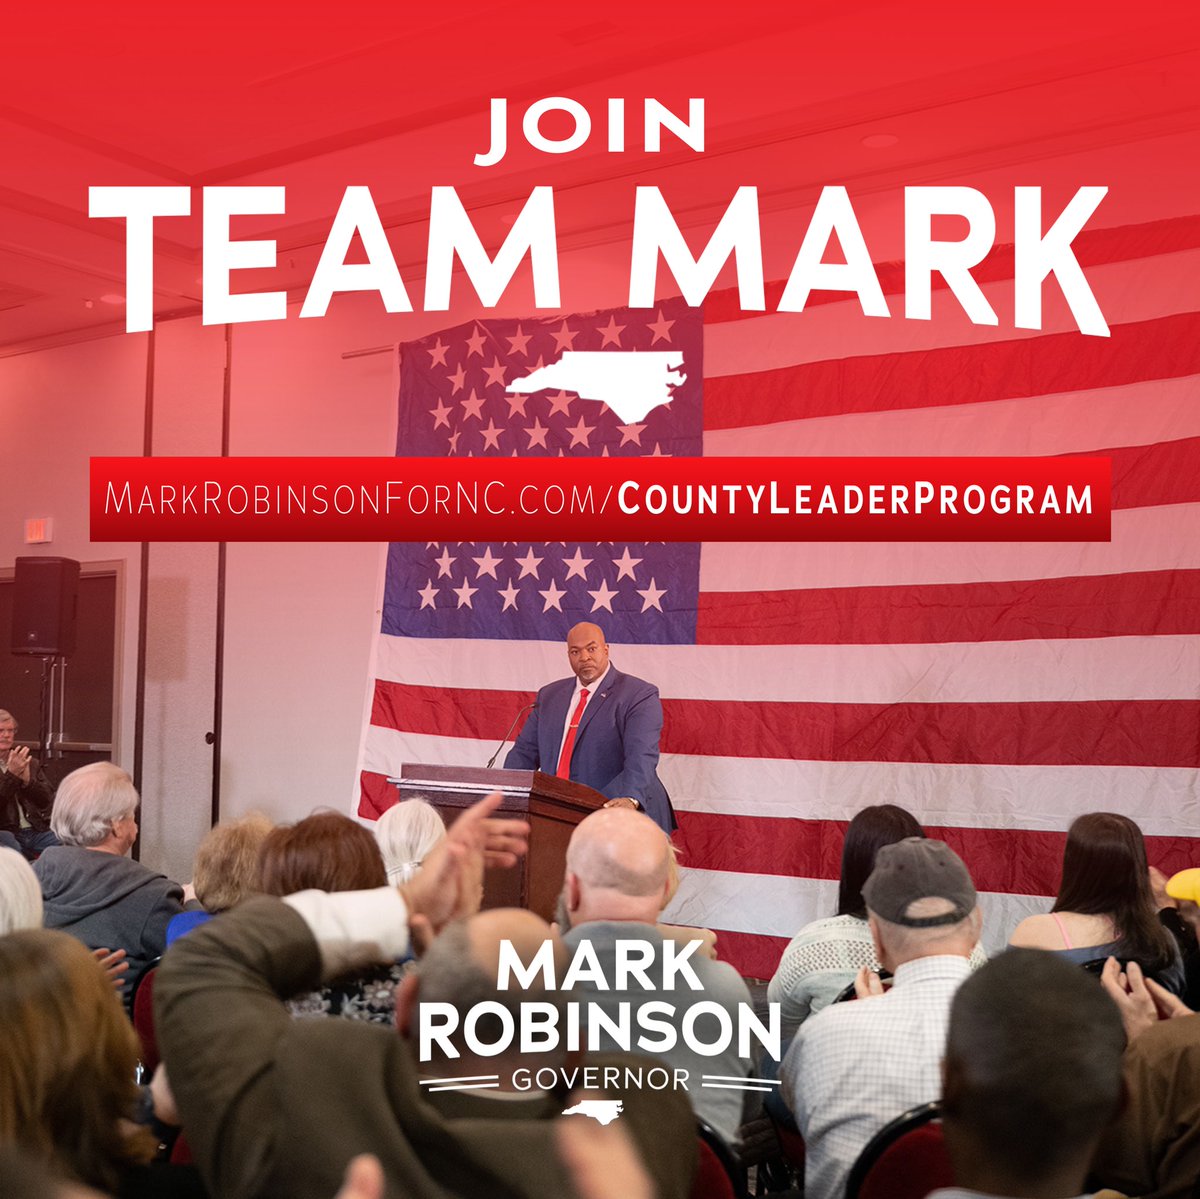 Have you joined our County Leader Program yet? We need strong supporters like YOU in the run-up to Election Day, and now is the time to get involved in the movement to RECLAIM and RESTORE North Carolina. Sign up today: markrobinsonfornc.com/countyleaderpr…